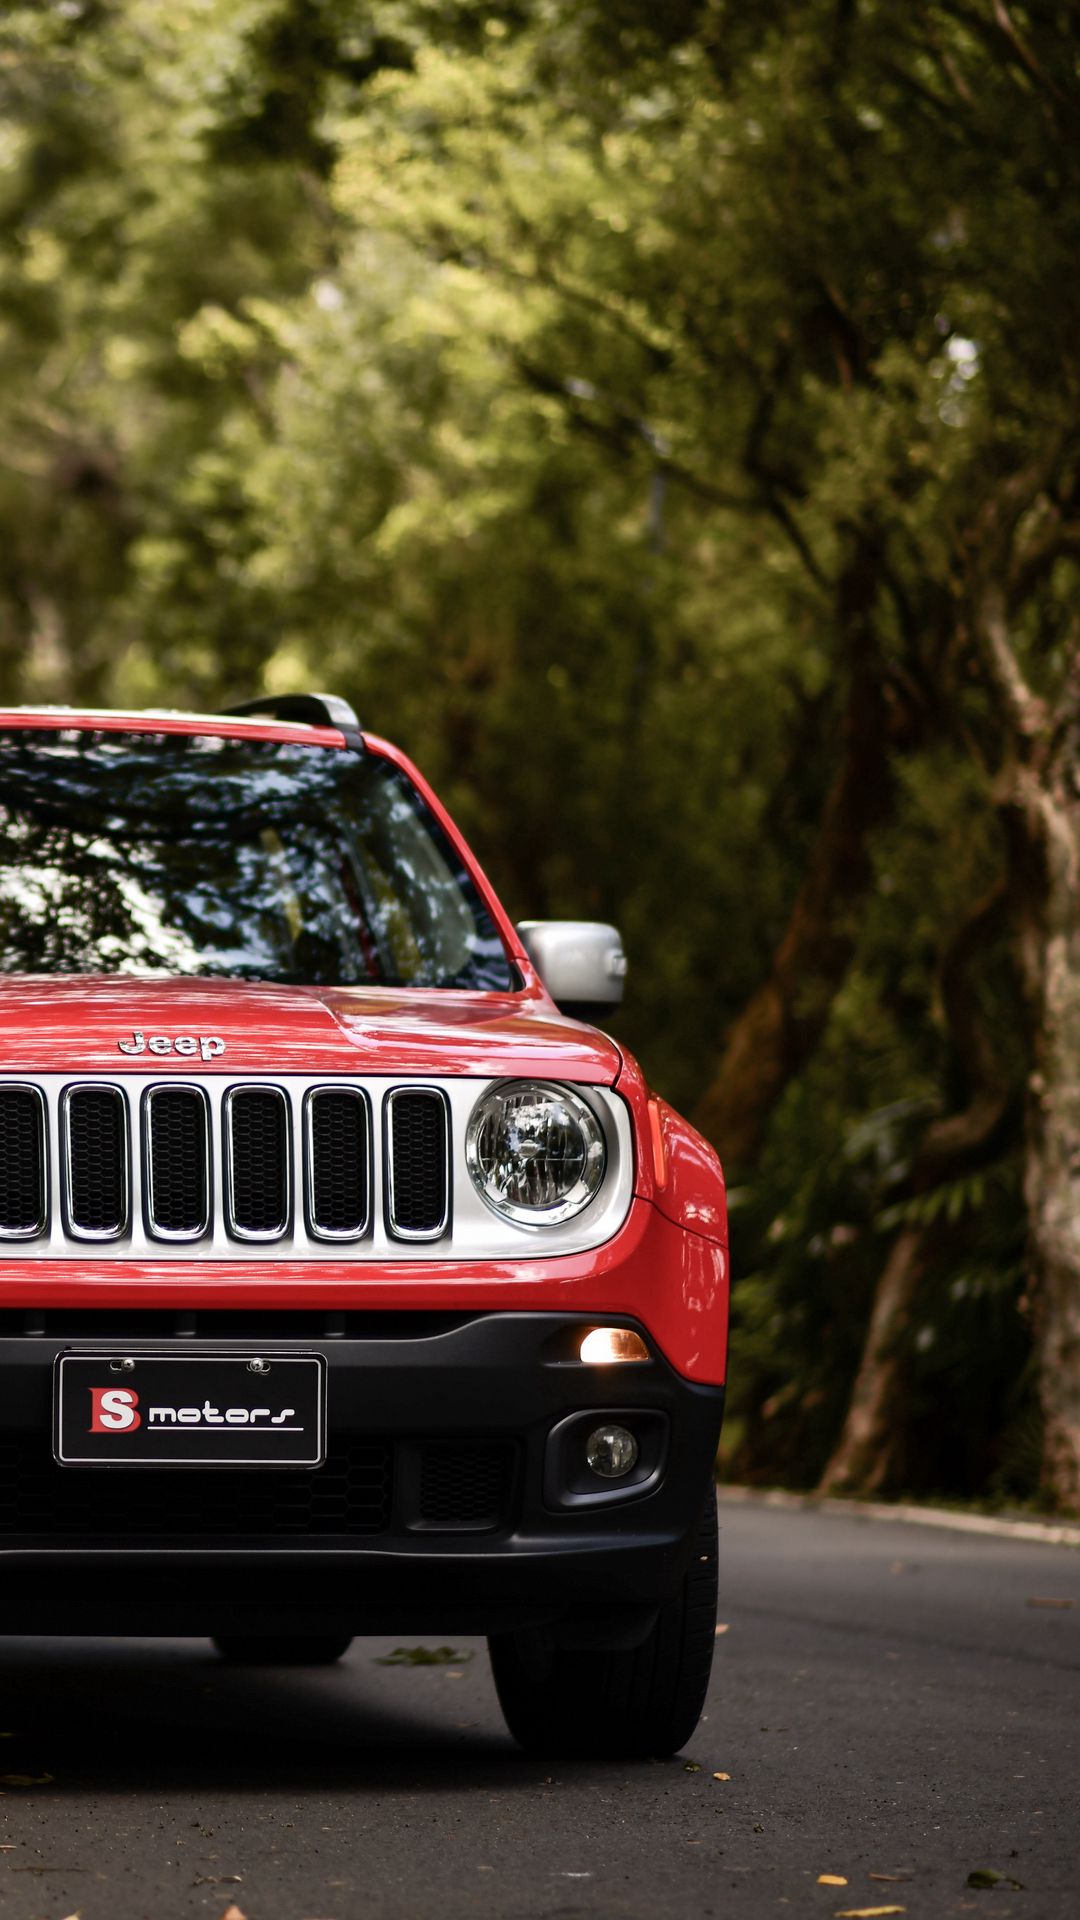 Download wallpaper 1080x1920 jeep renegade, jeep, car, suv, red, front view  samsung galaxy s4, s5, note, sony xperia z, z1, z2, z3, htc one, lenovo  vibe hd background